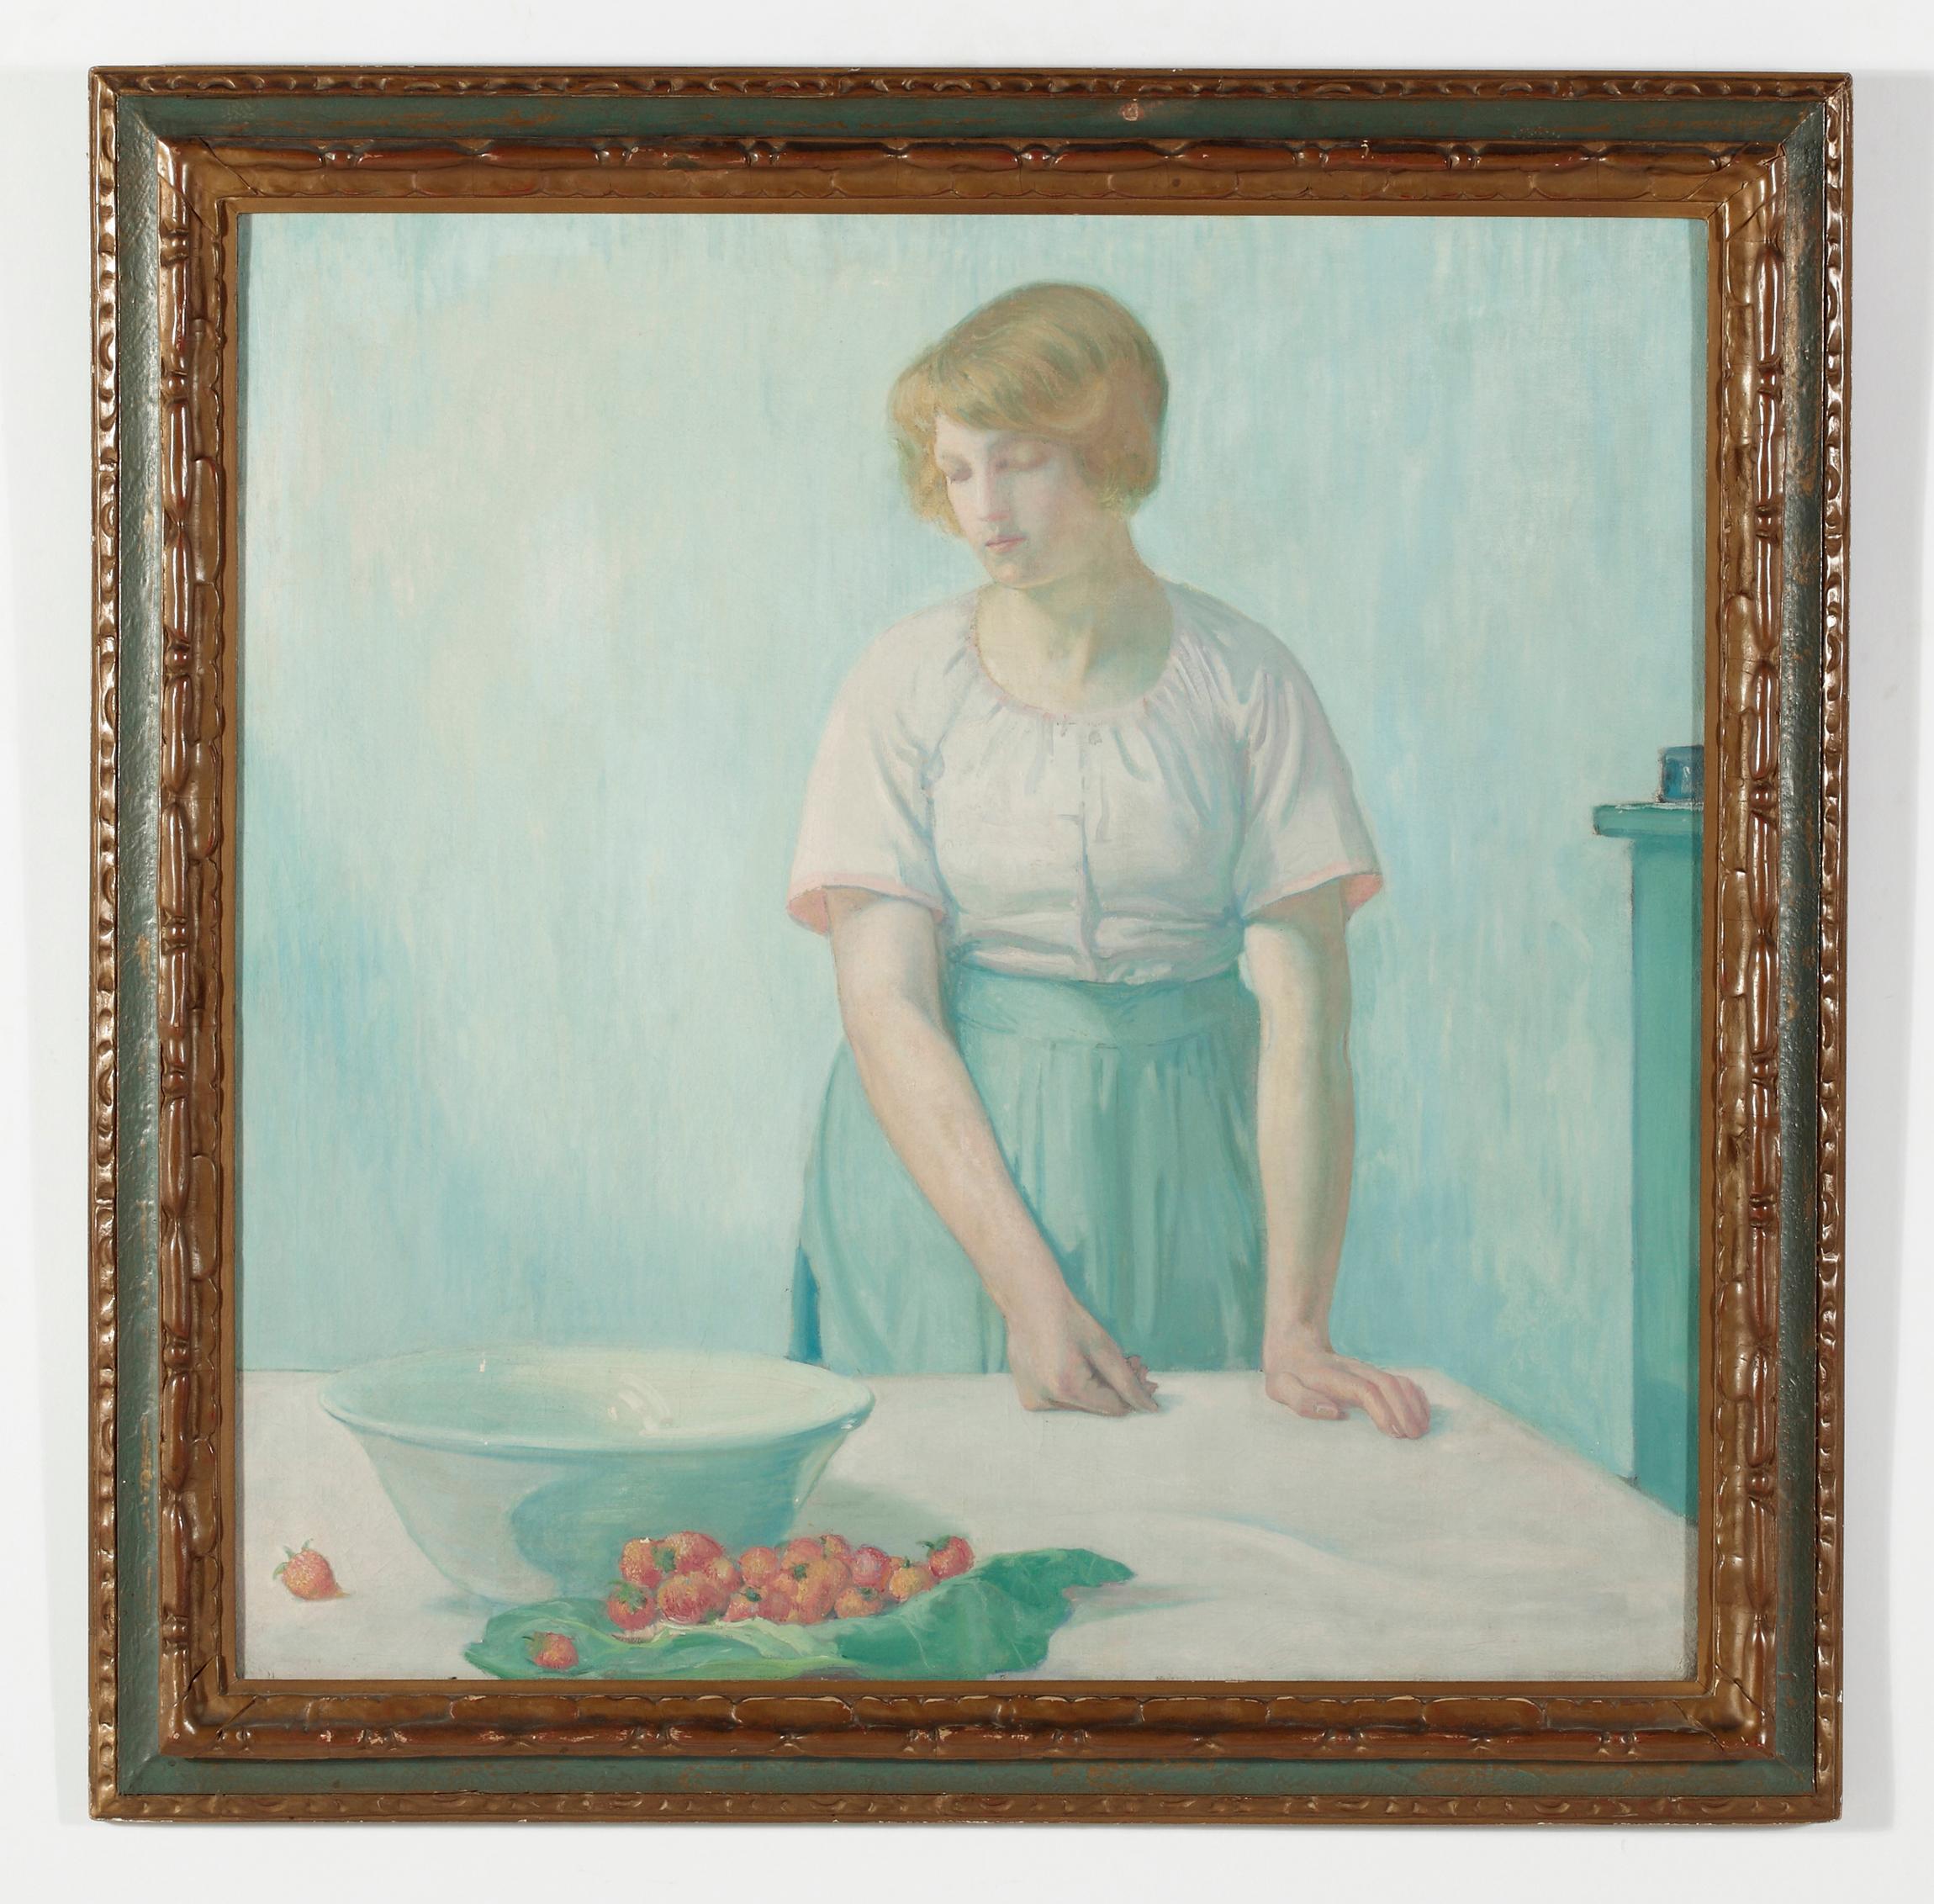 Woman with Strawberries - Painting by Myron Barlow